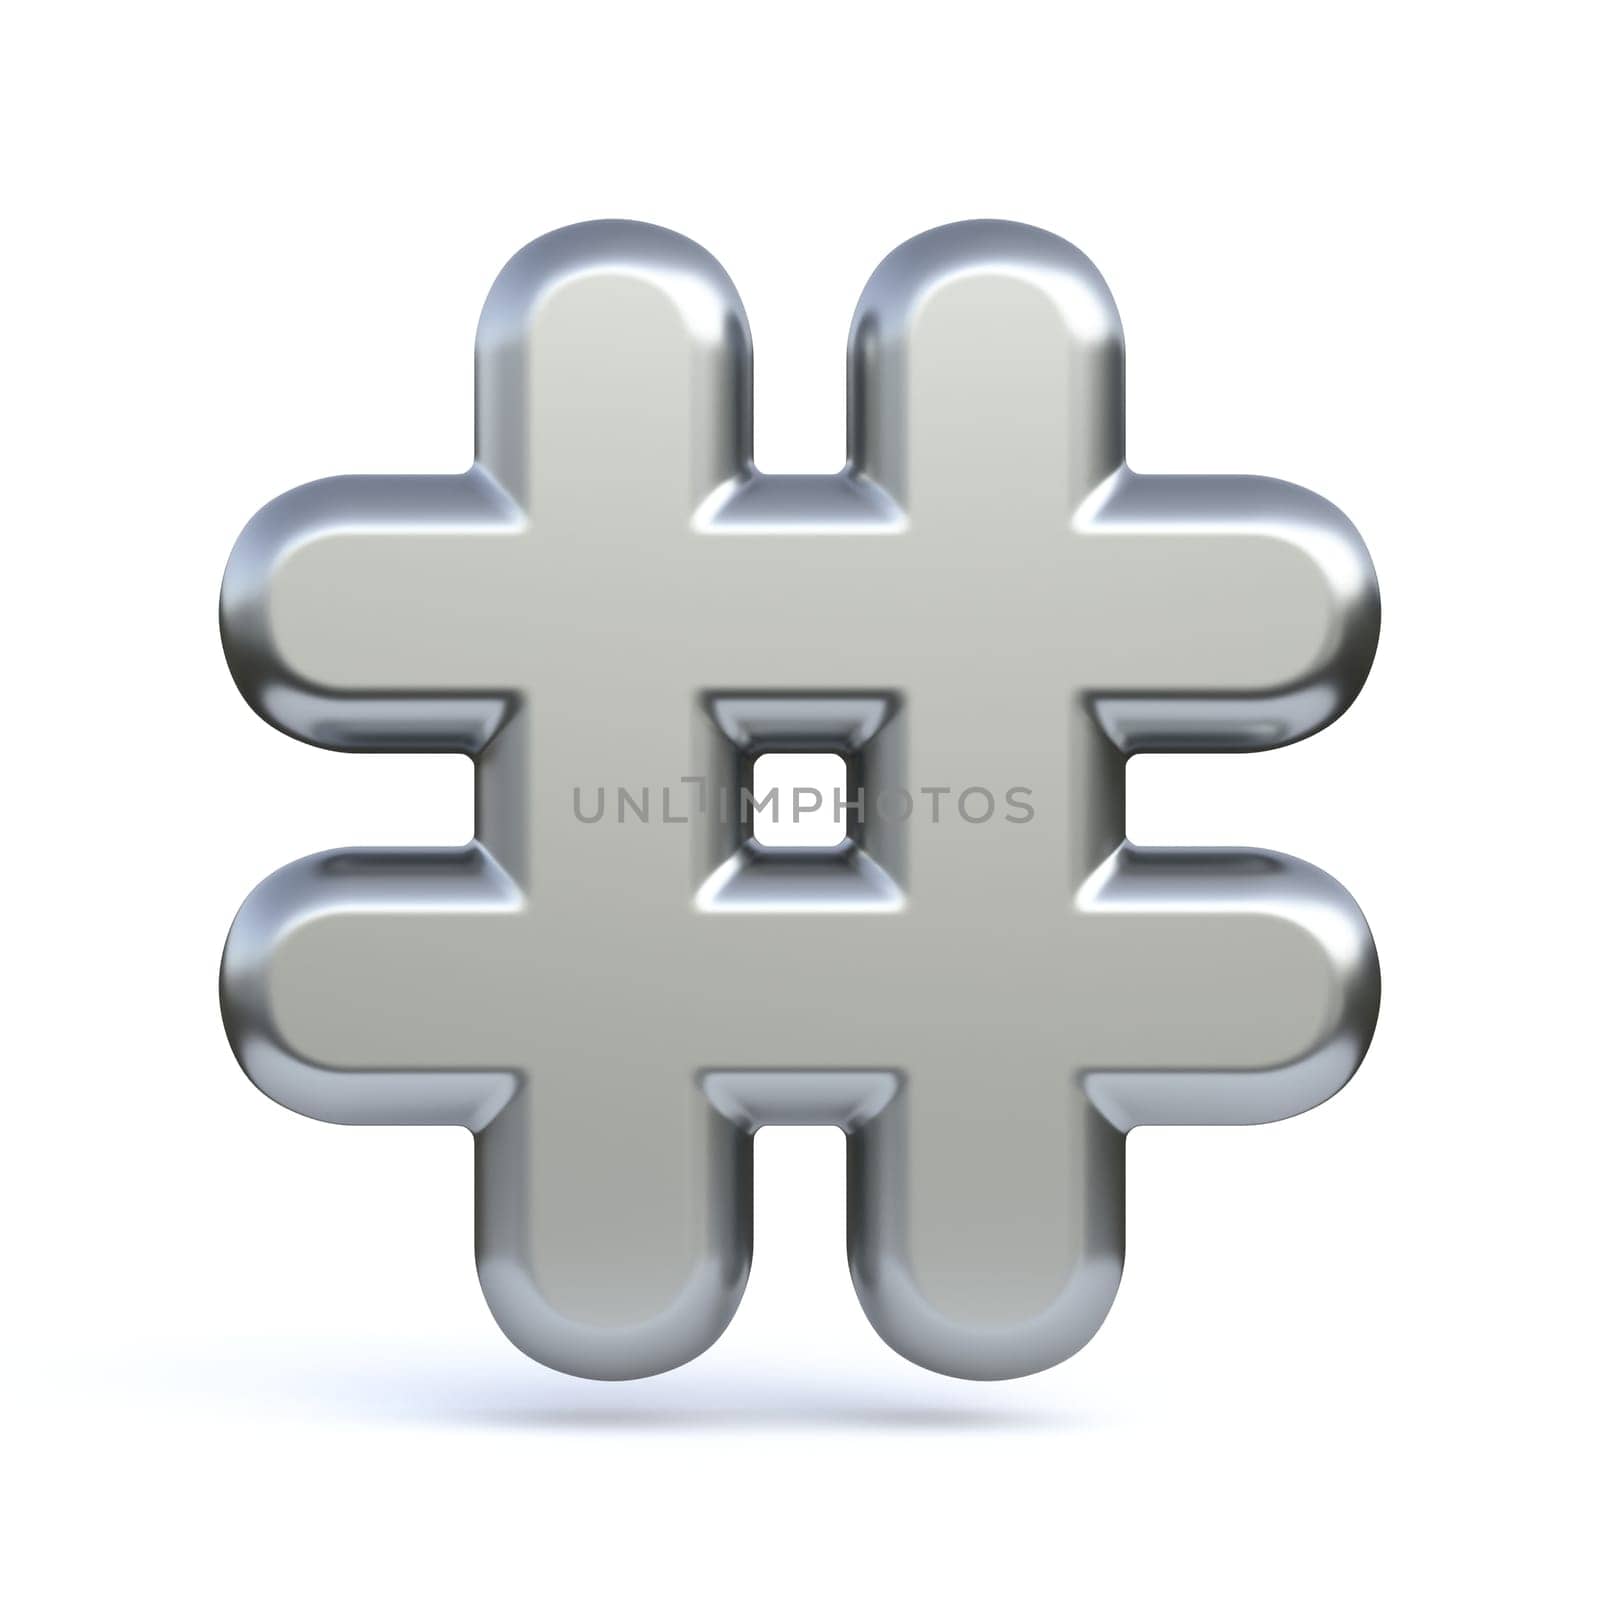 Hashtag sign 3D by djmilic